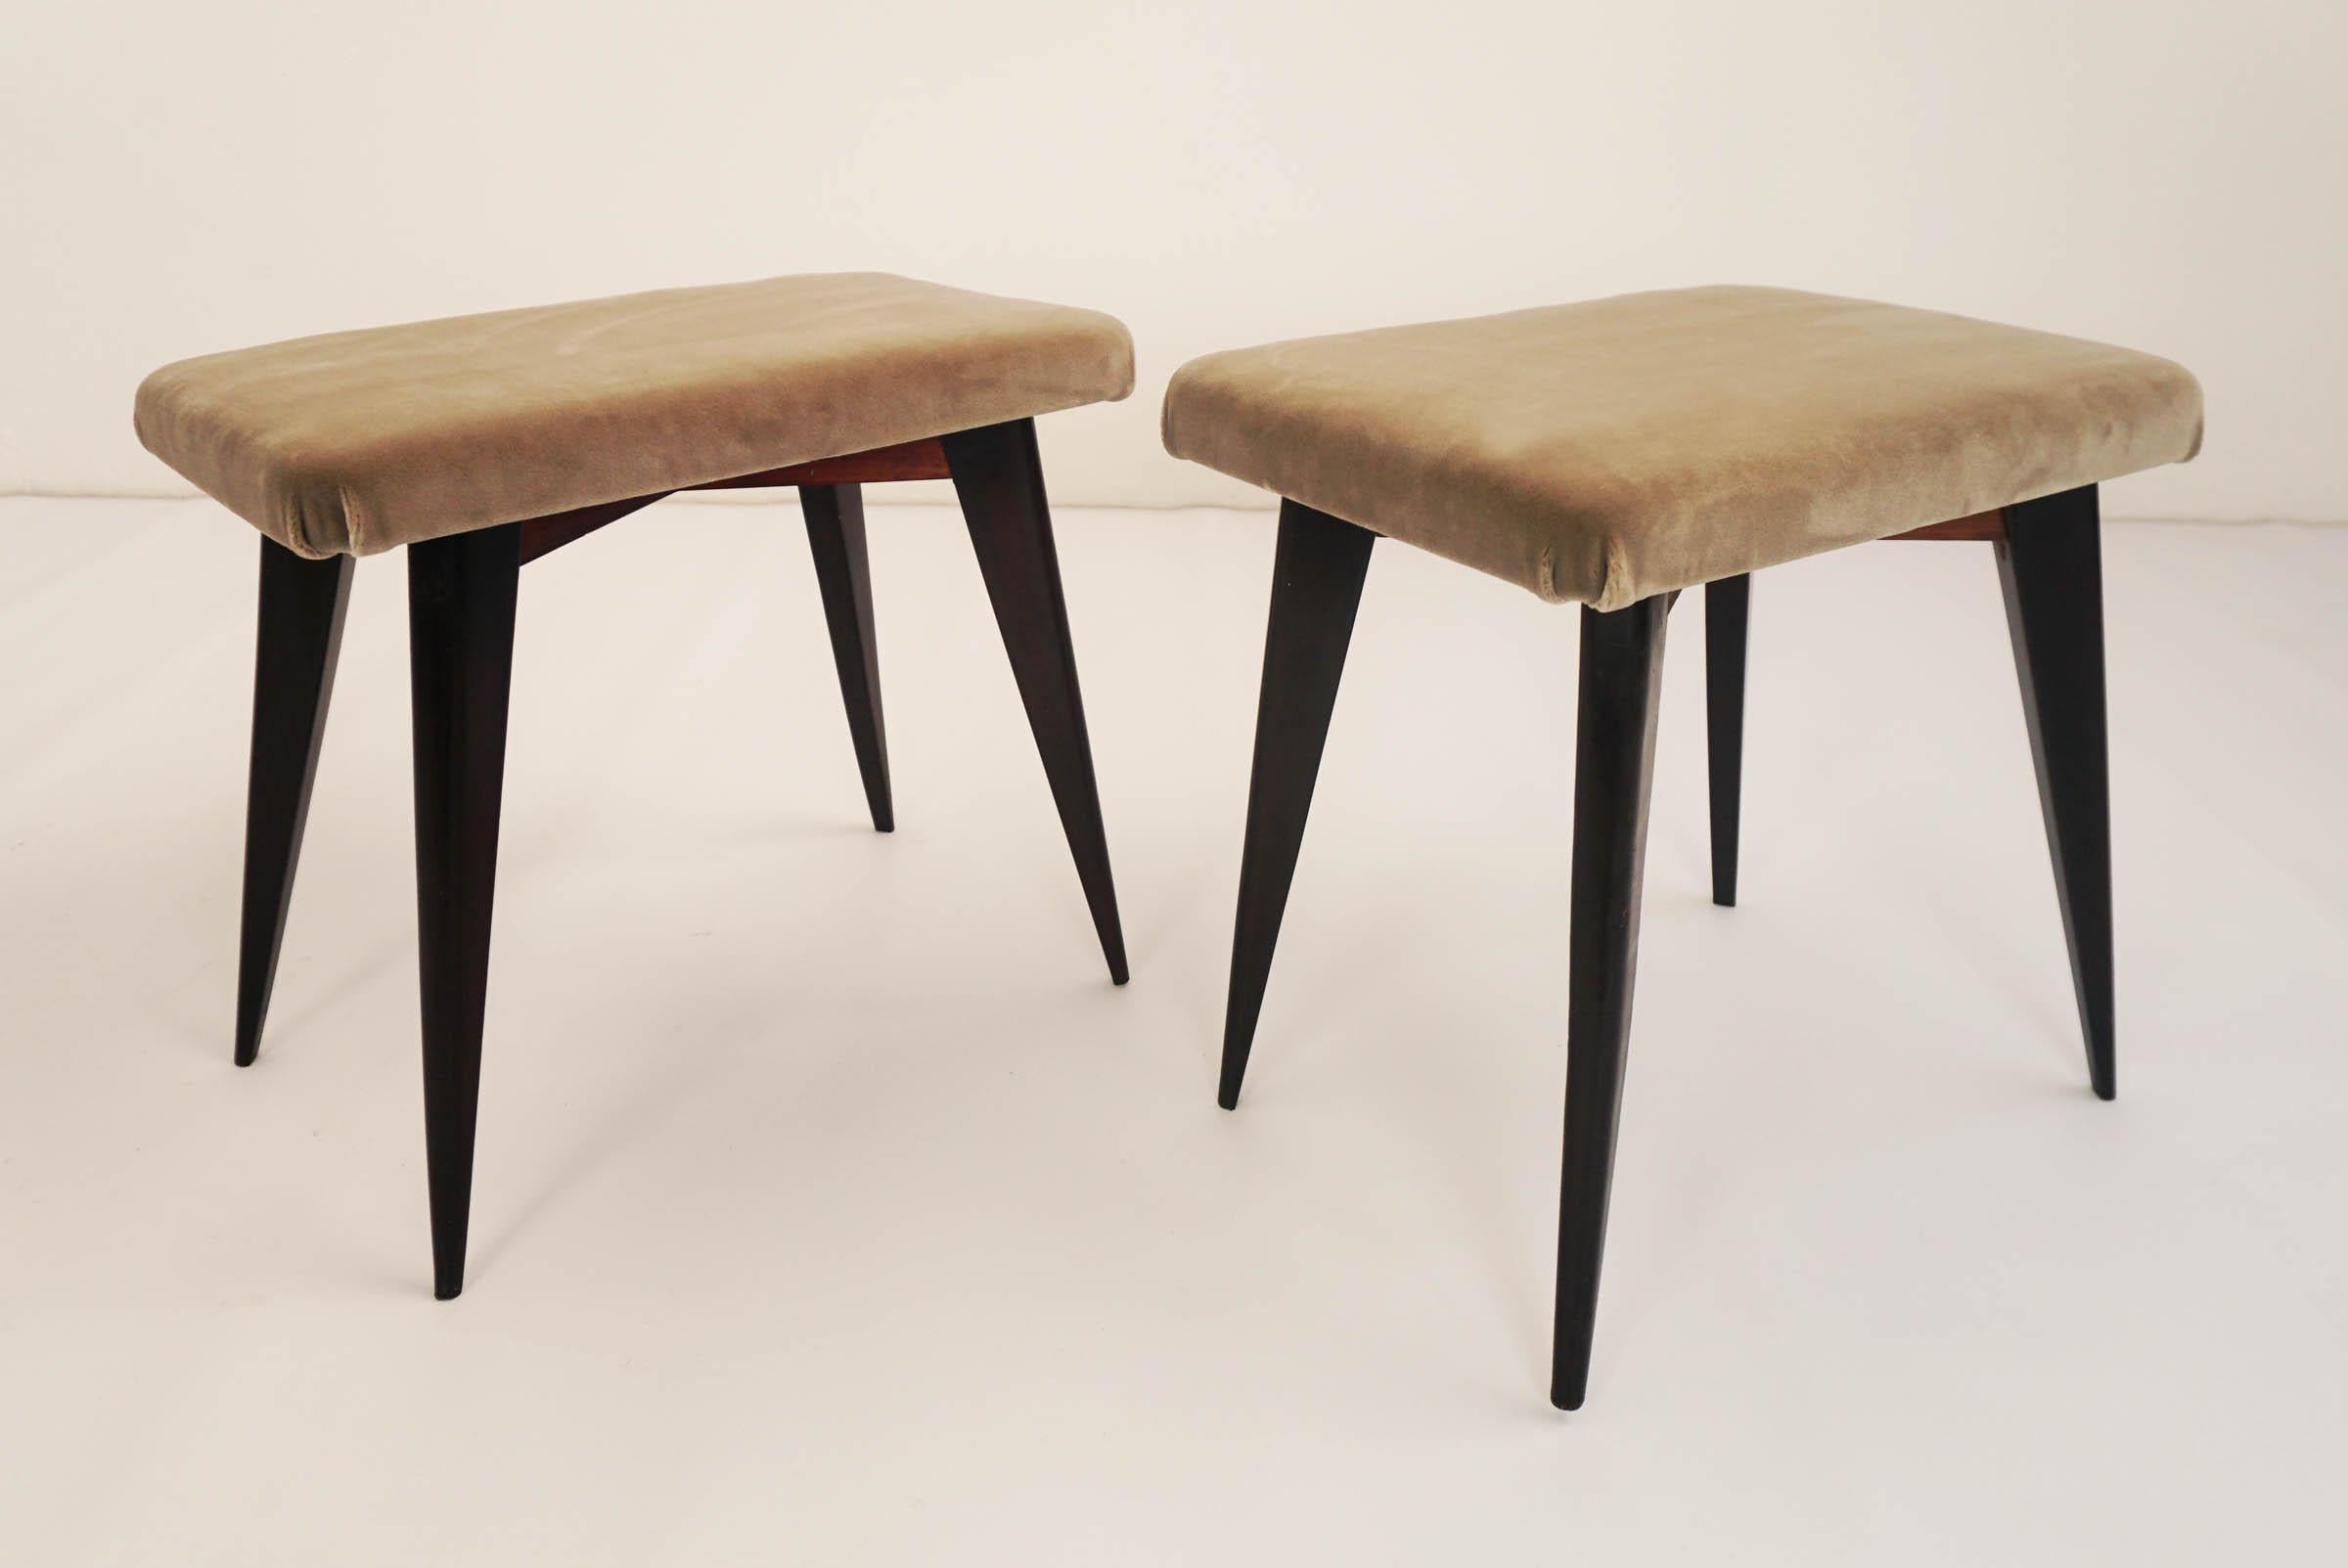 Beautiful pair of stools with 